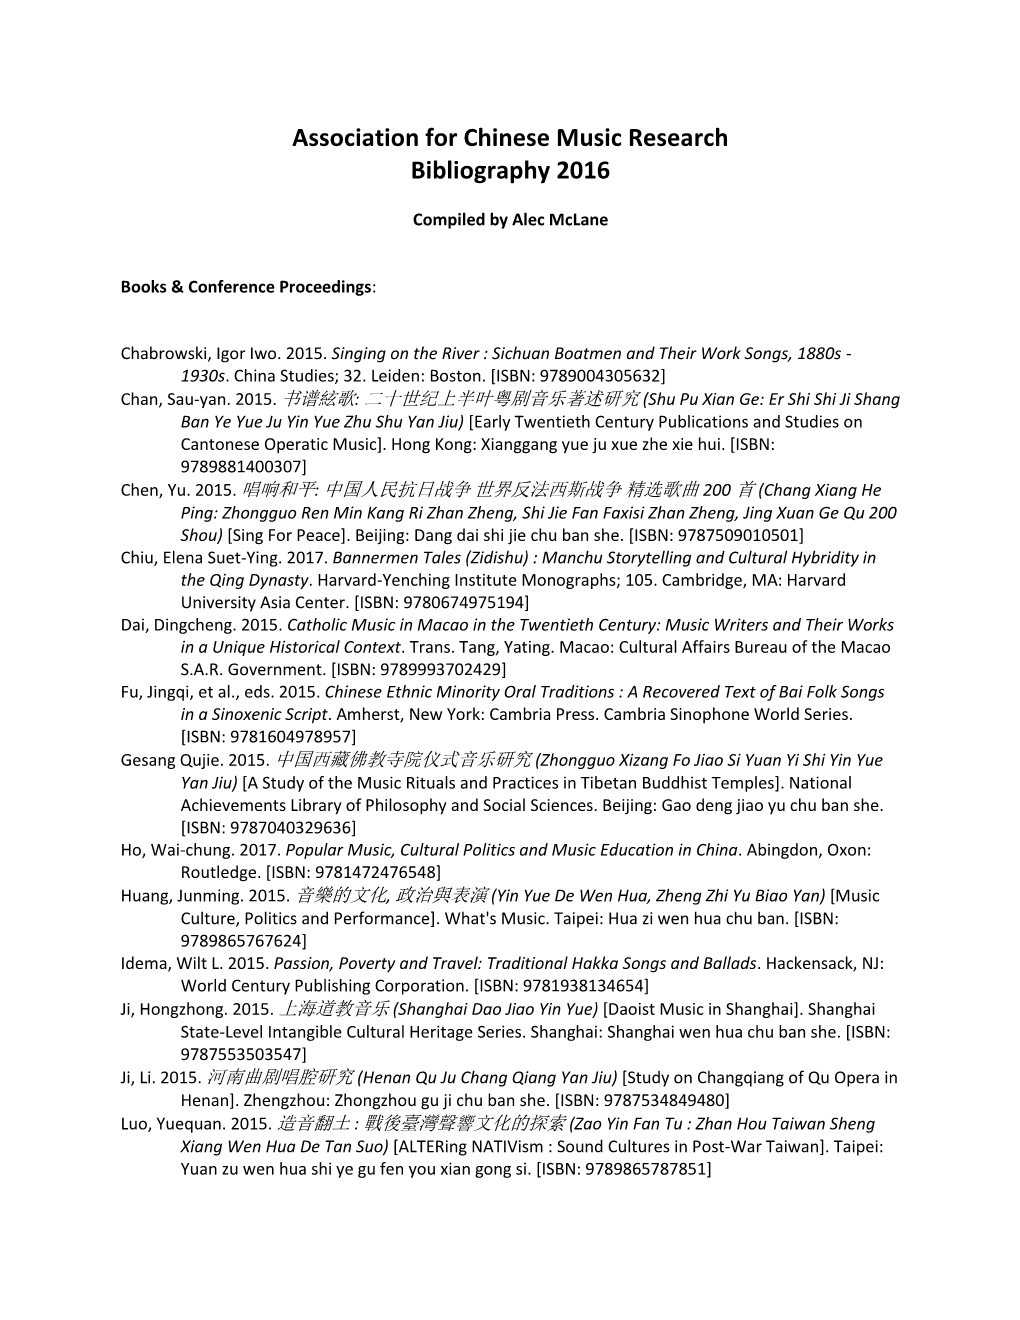 Association for Chinese Music Research Bibliography 2016